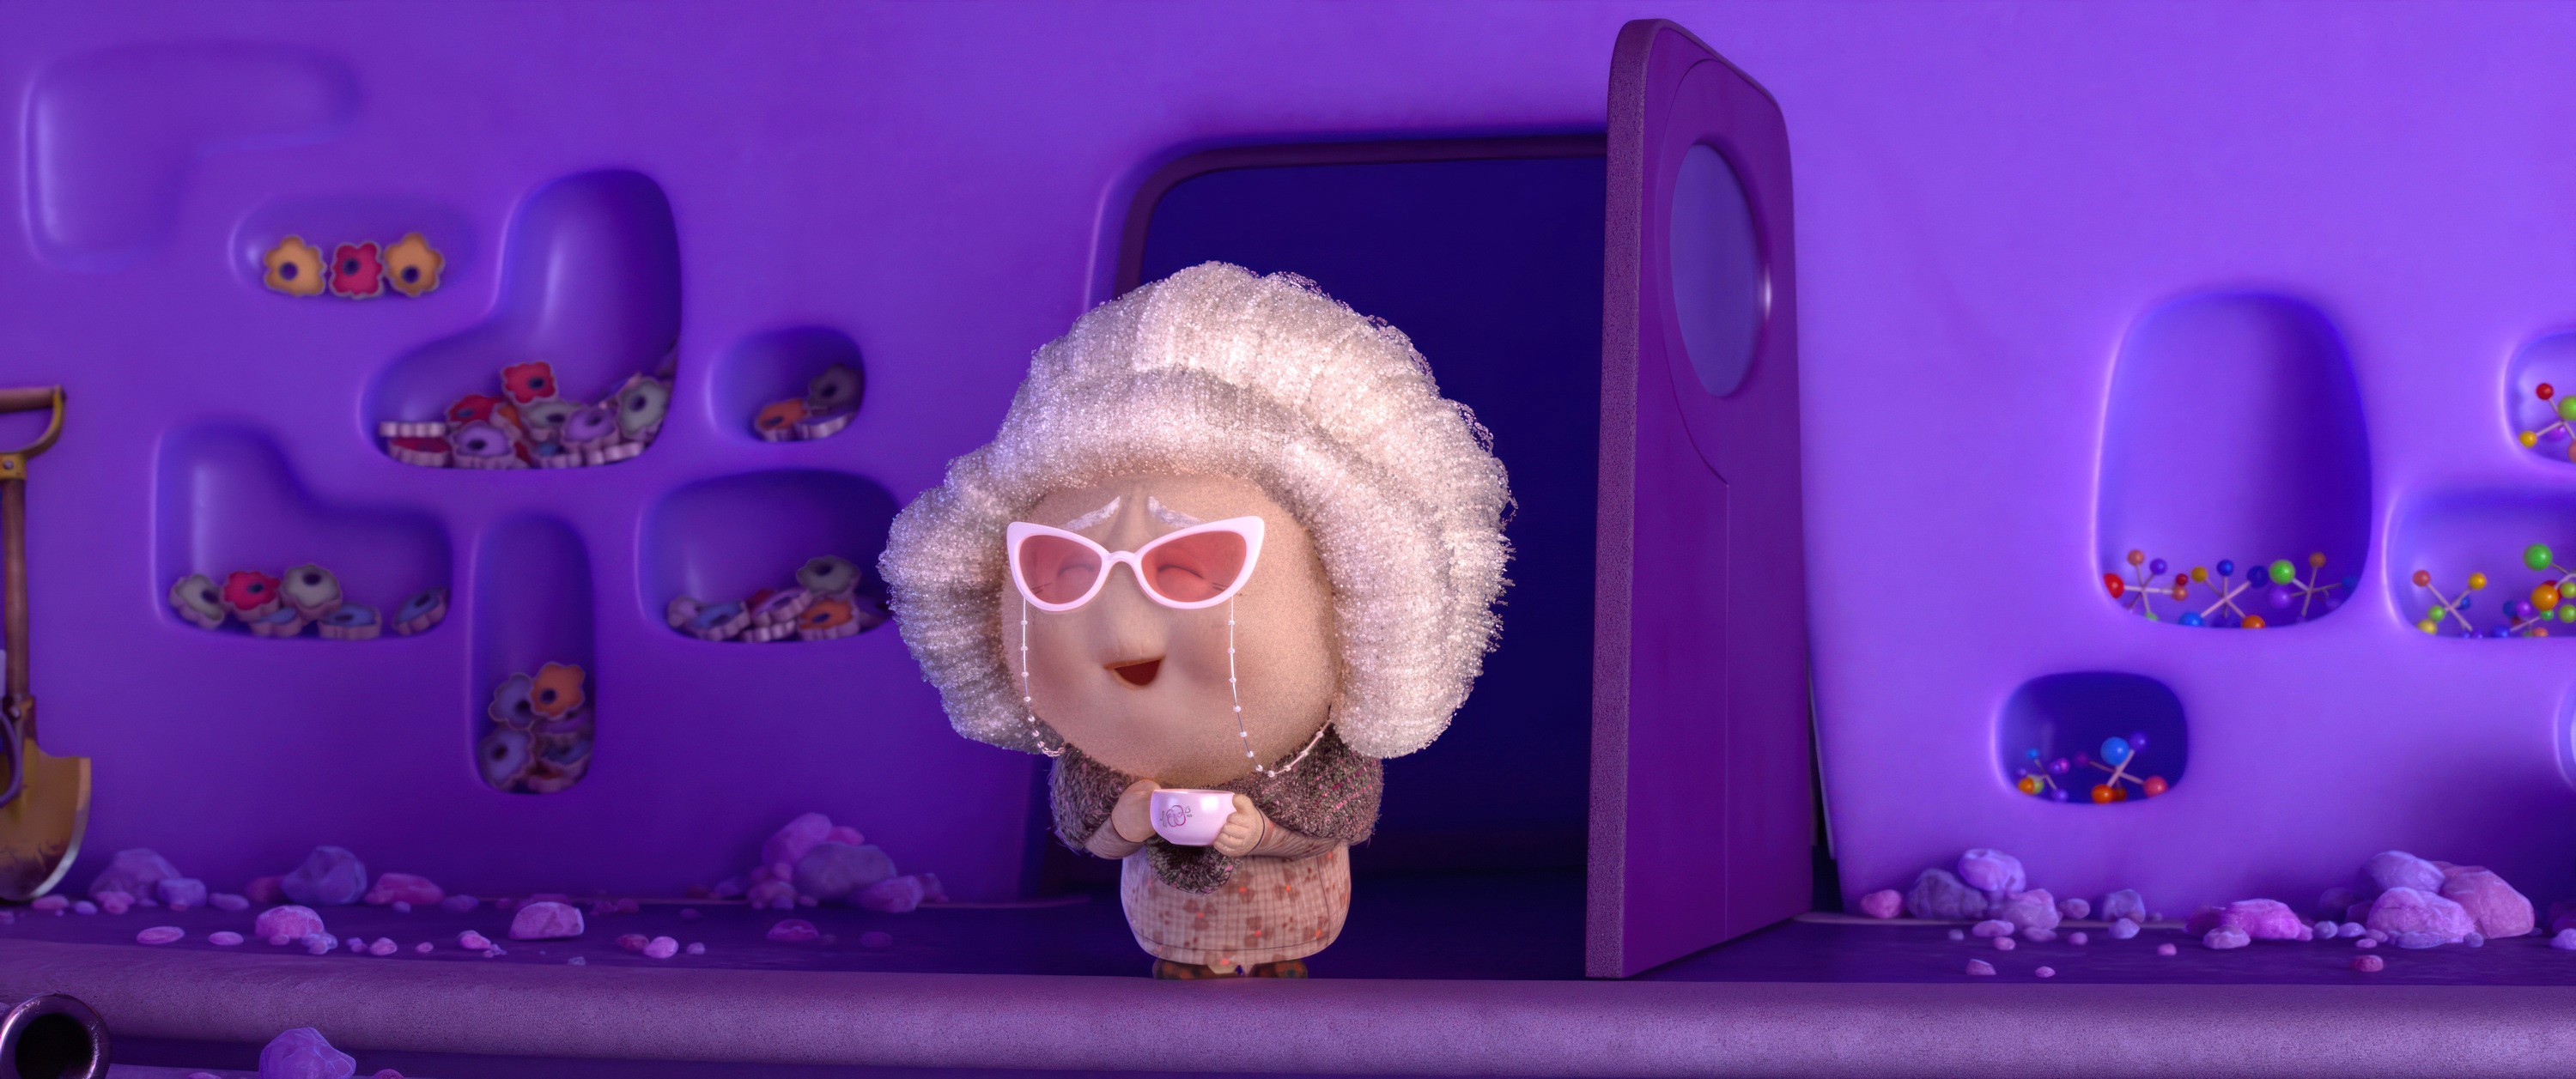 Nostalgia, a character from Pixar’s animated movie Inside Out 2, stands in a doorway. She looks like a little old lady with white hair, and pink cats-eye glasses attached to her face with a chain.